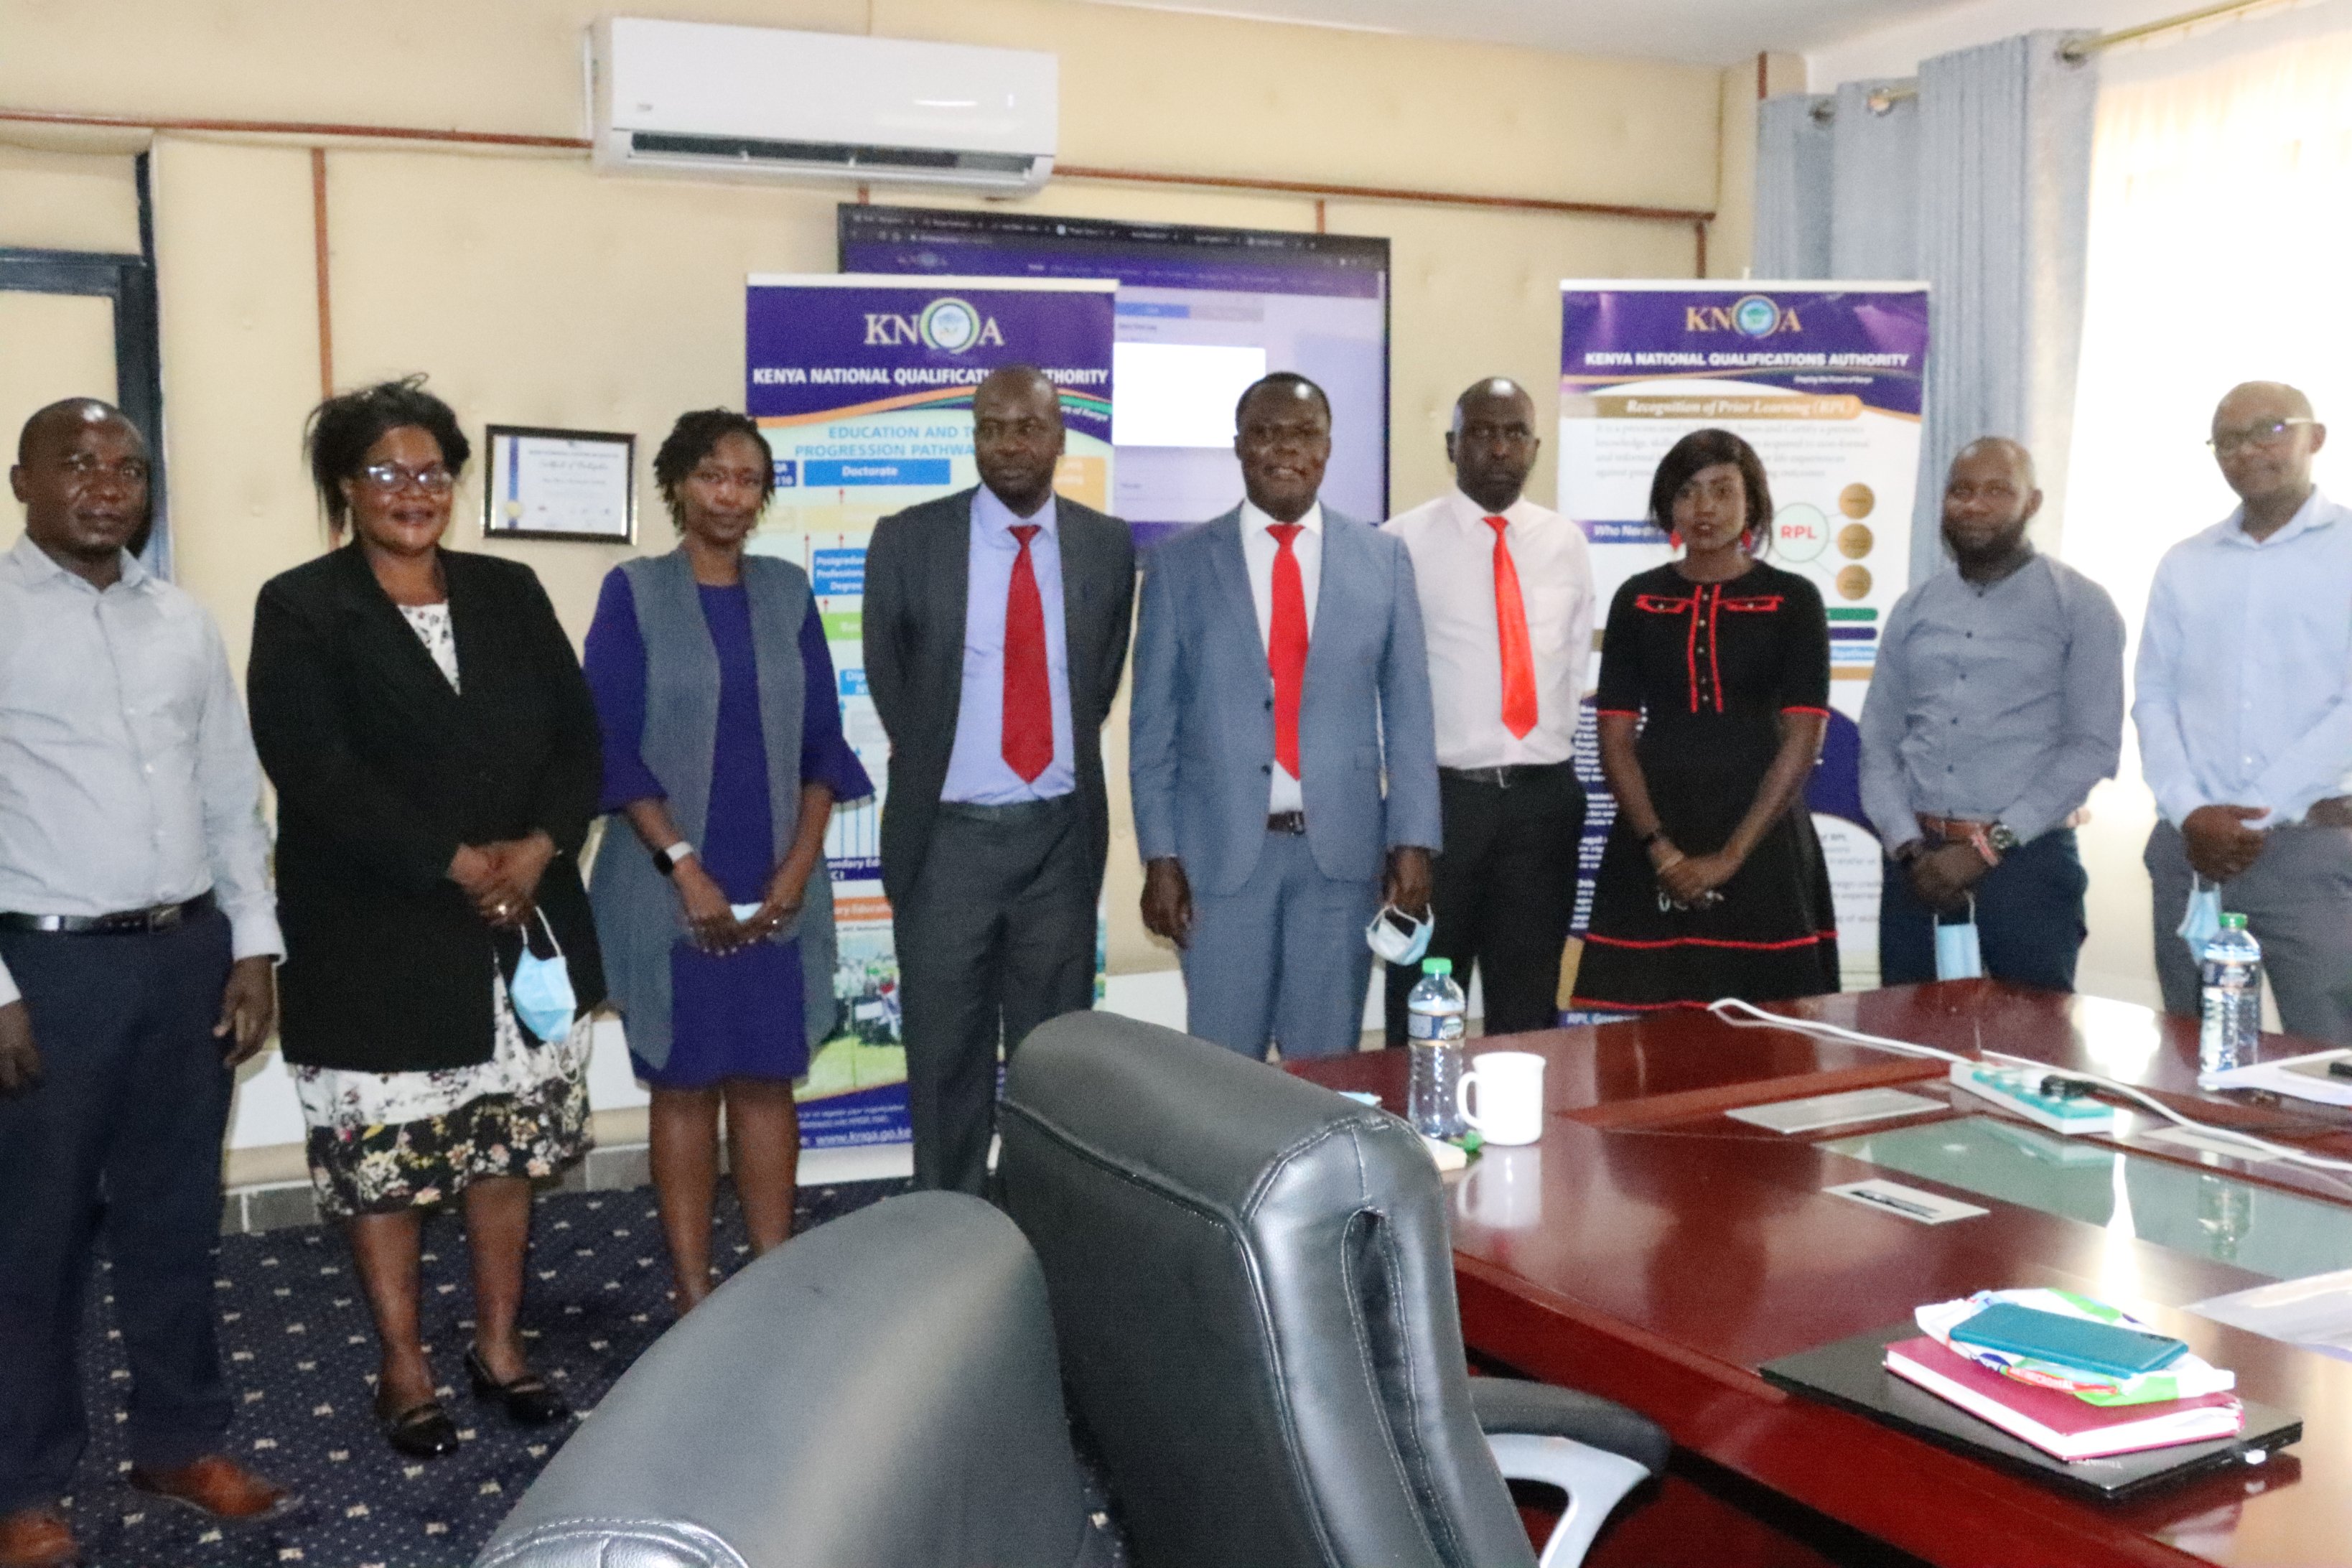 KNQA CEO Dr. Juma Mukhwana today hosted  @AjiraDigital  team at KNQA offices. The meeting deliberations were on a partnership between KNQA and Ajira and the verification of qualifications for members of Ajira.